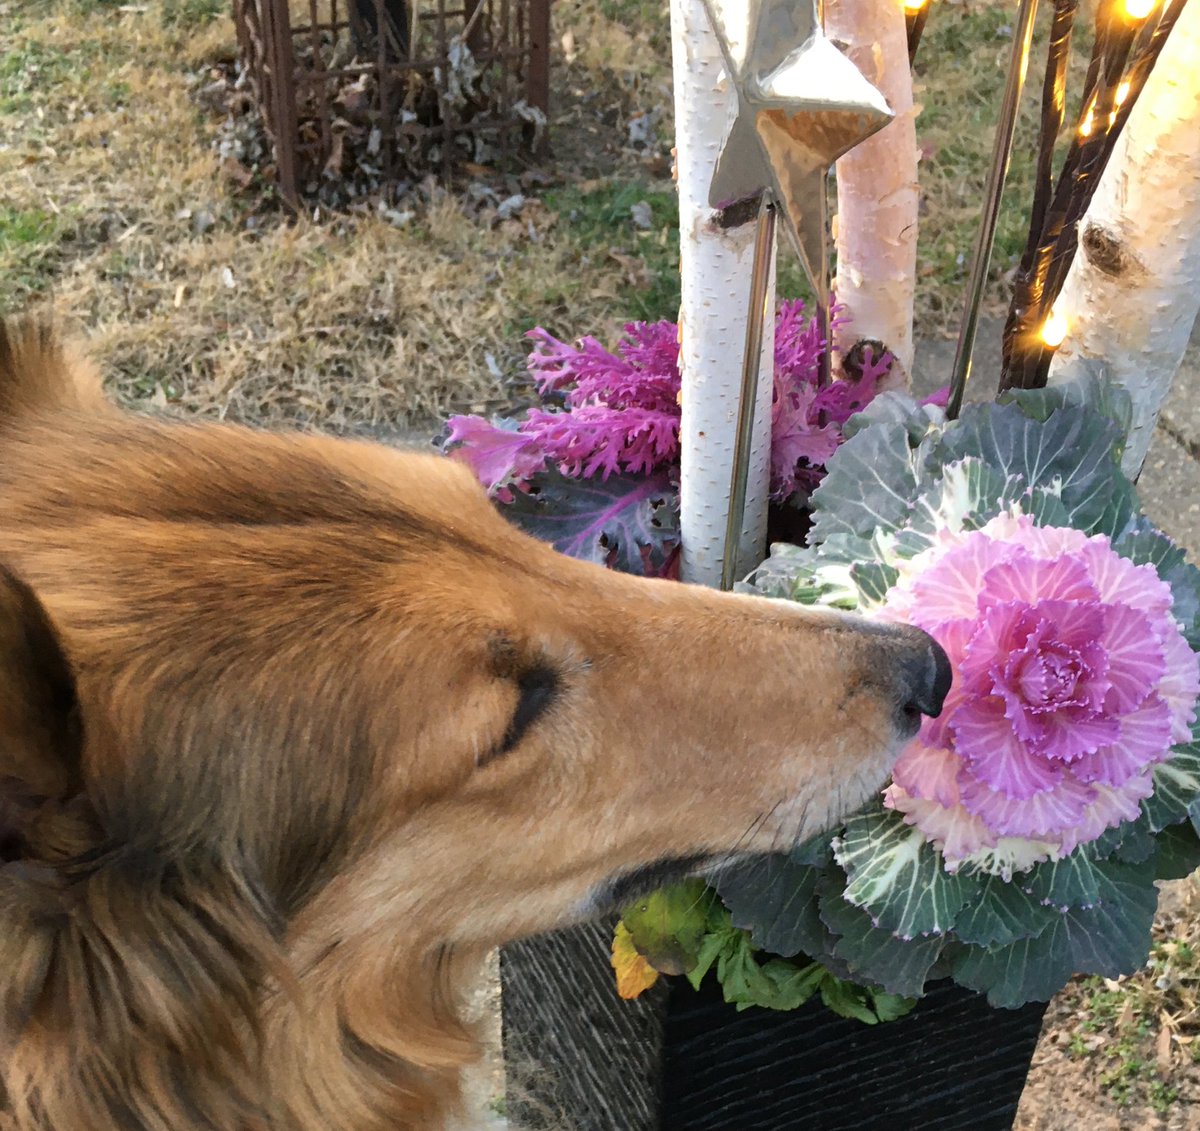 It was chilly 🥶 but this #collieflower enjoyed a brisk walk and ended up #reachingforthestars ⭐️
🌸 🥬 🌸 
I wasn’t sure if the plant 🌱 was a cabbage 🥬 or 🌸 #flower so I had to get closer and inspect it! 🥬 🌺 

#collie #dogsandflowers